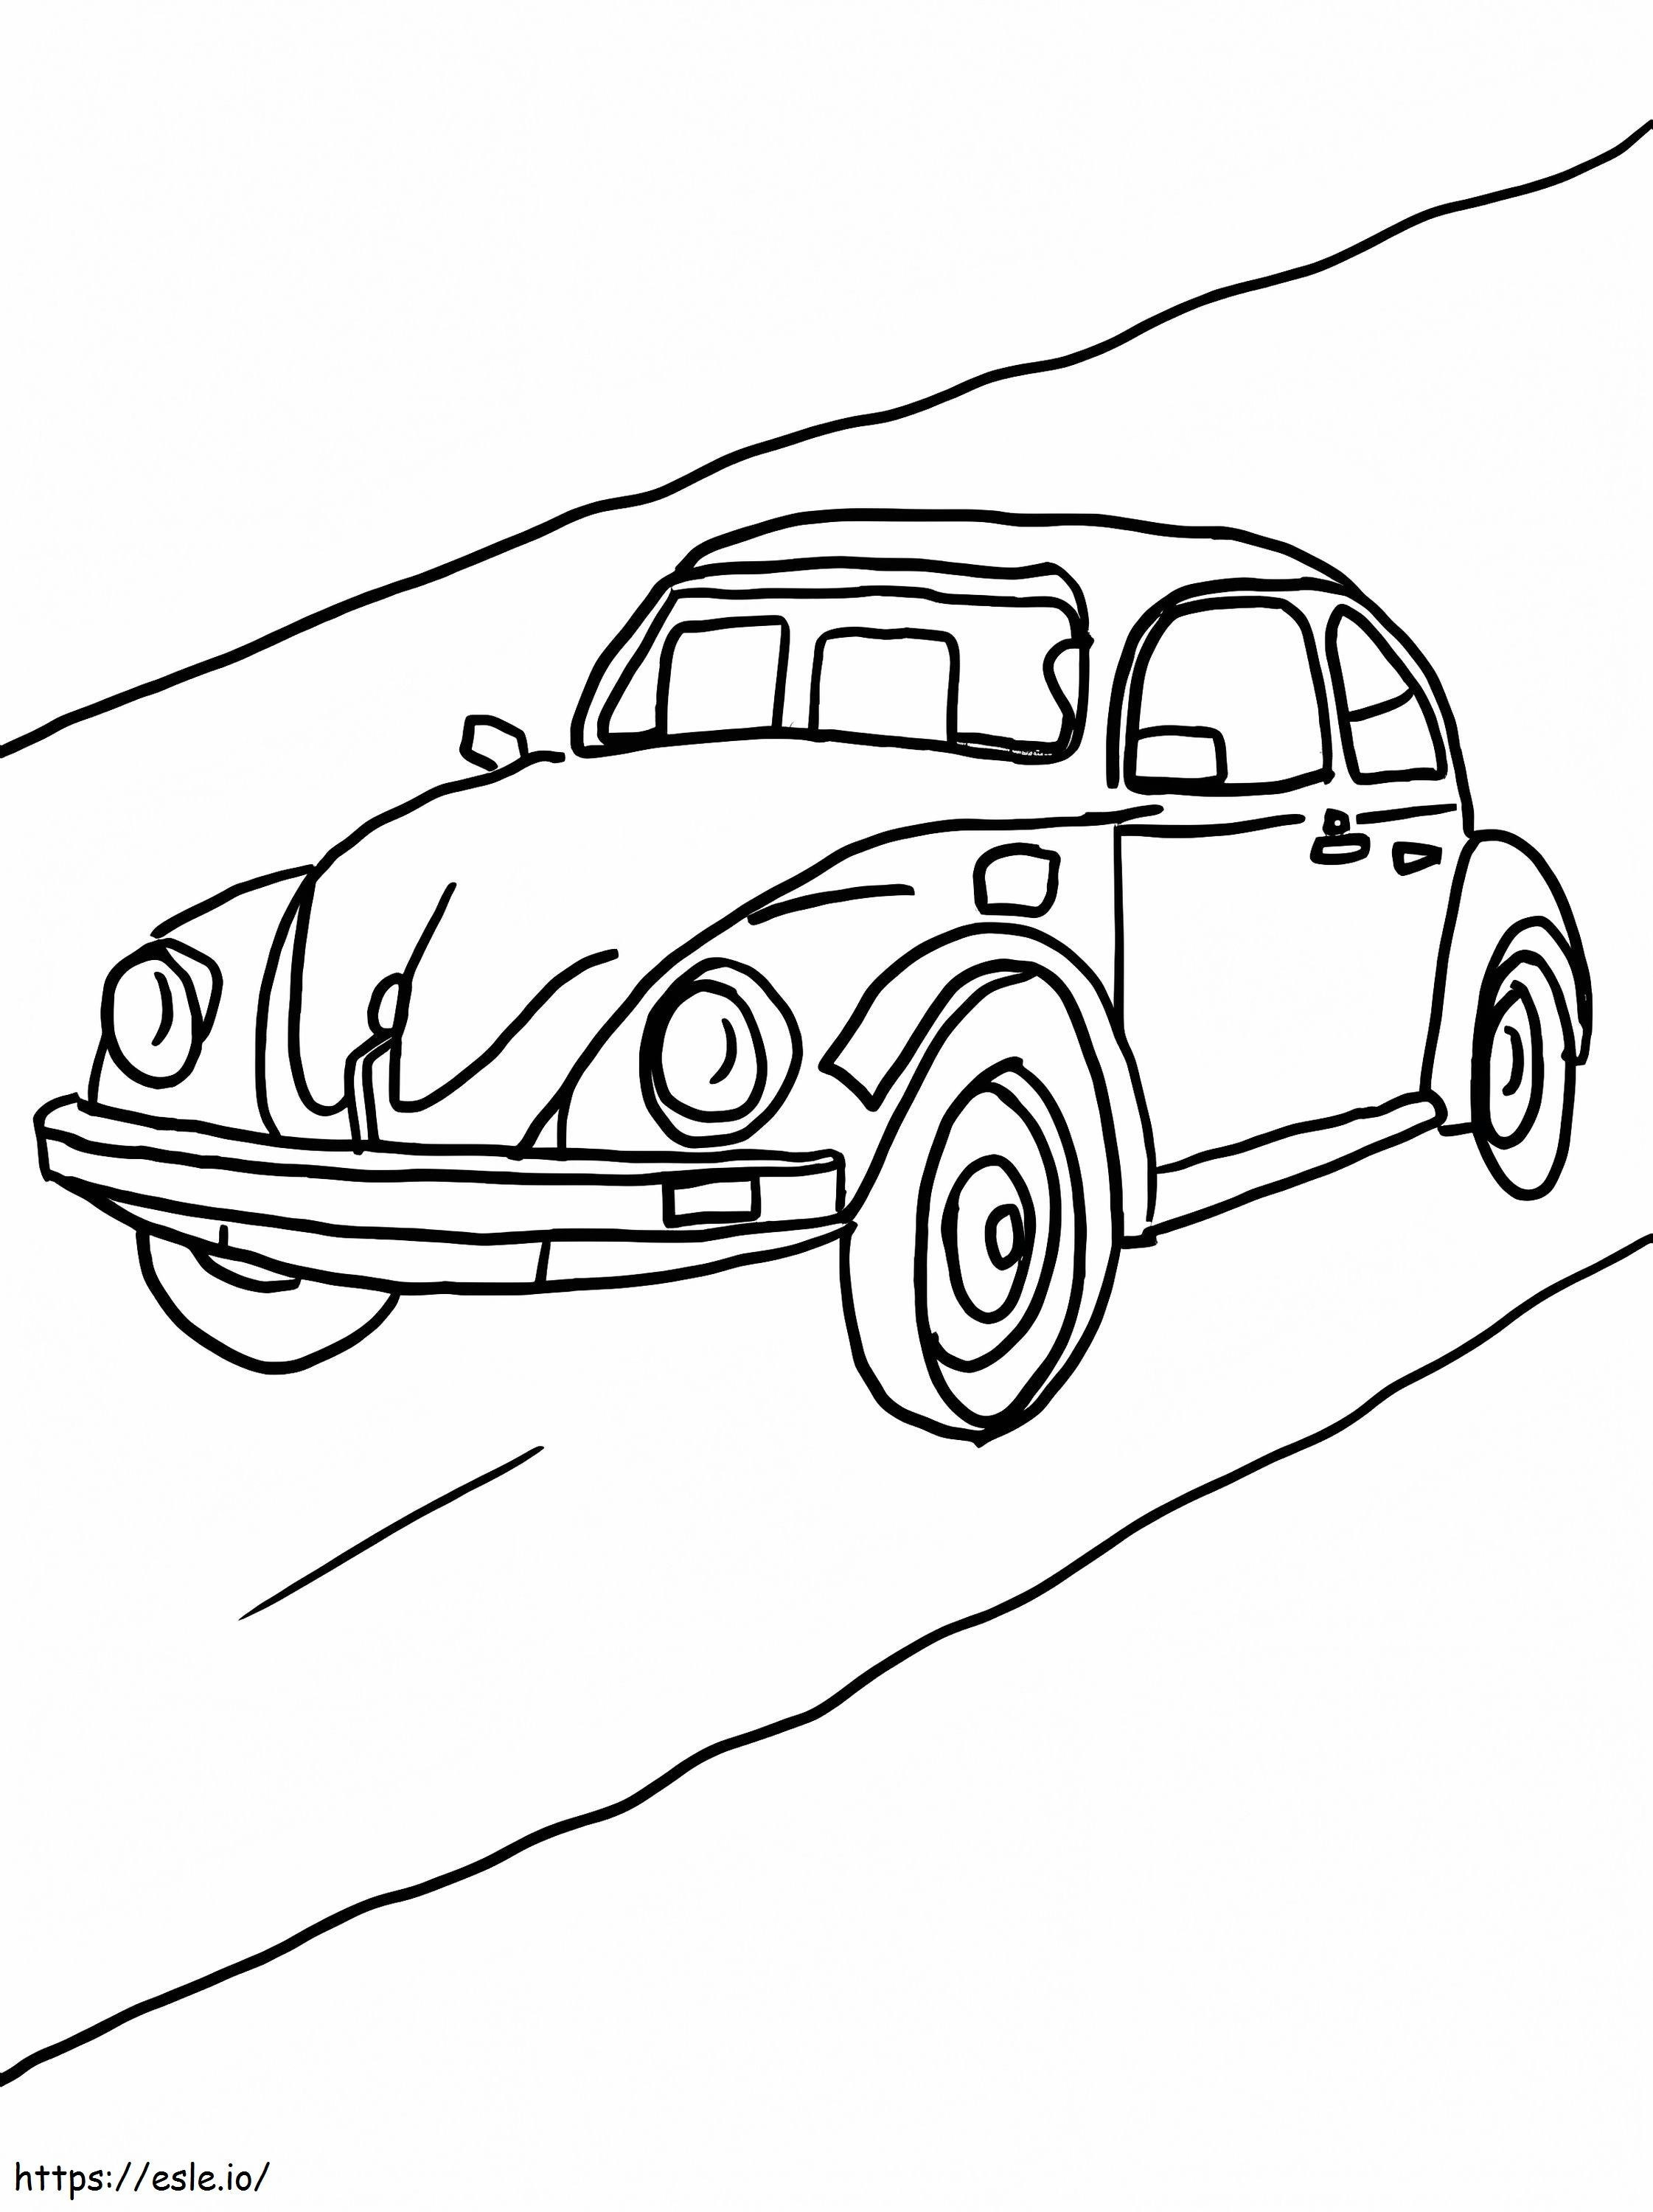 Basic Car On Road coloring page